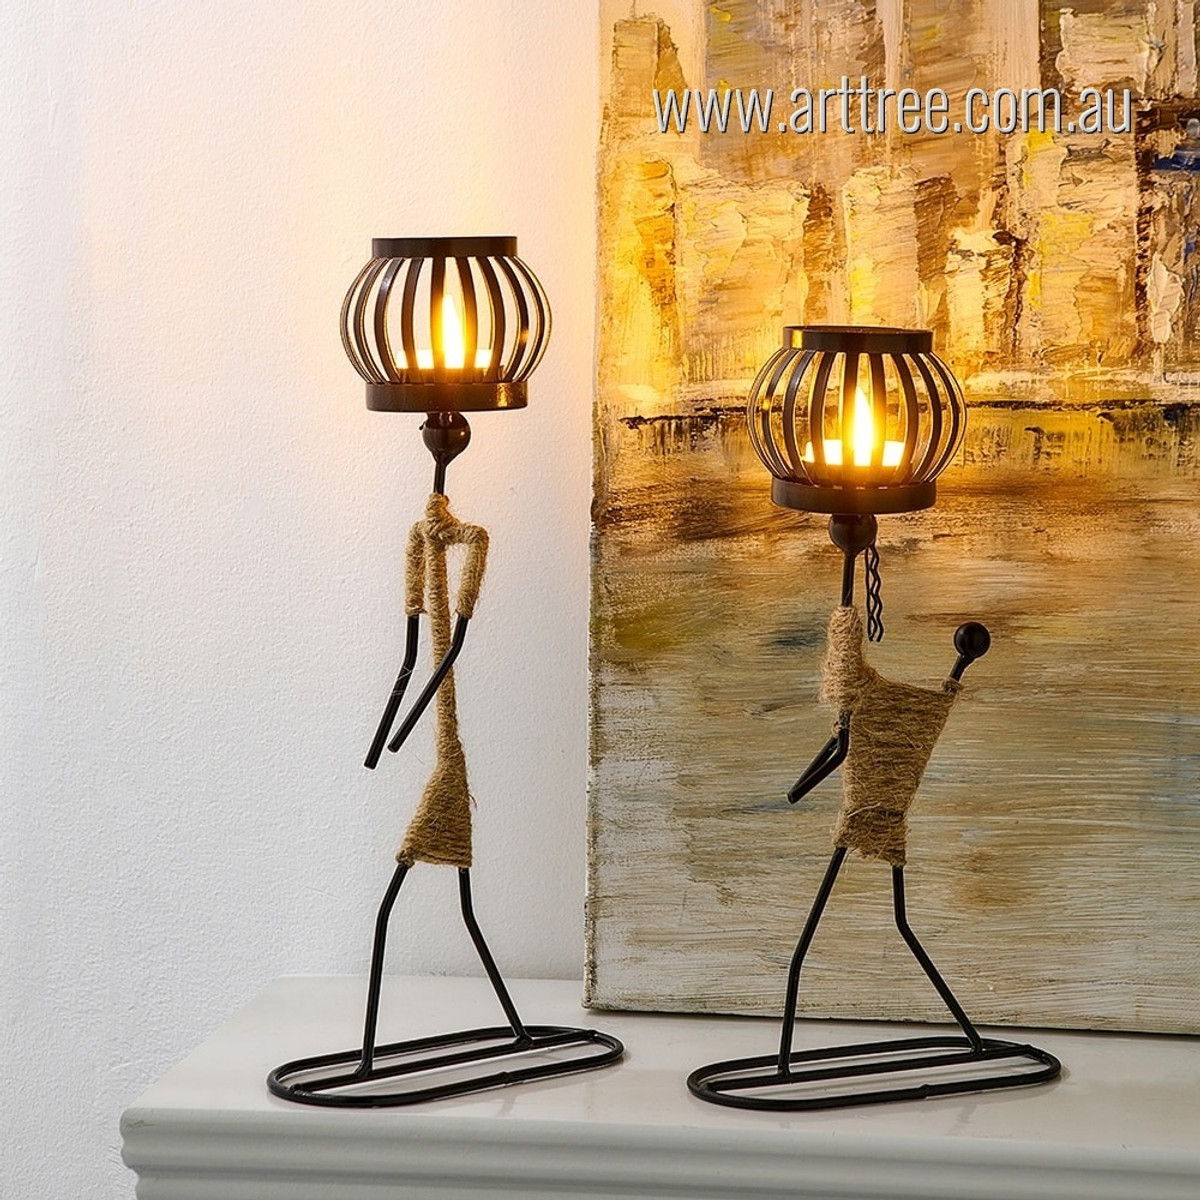 Humans Candle Lamp Holder Abstract 2 Piece Handmade Figurine Vintage Iron Sculptures For Sale Home Decoration